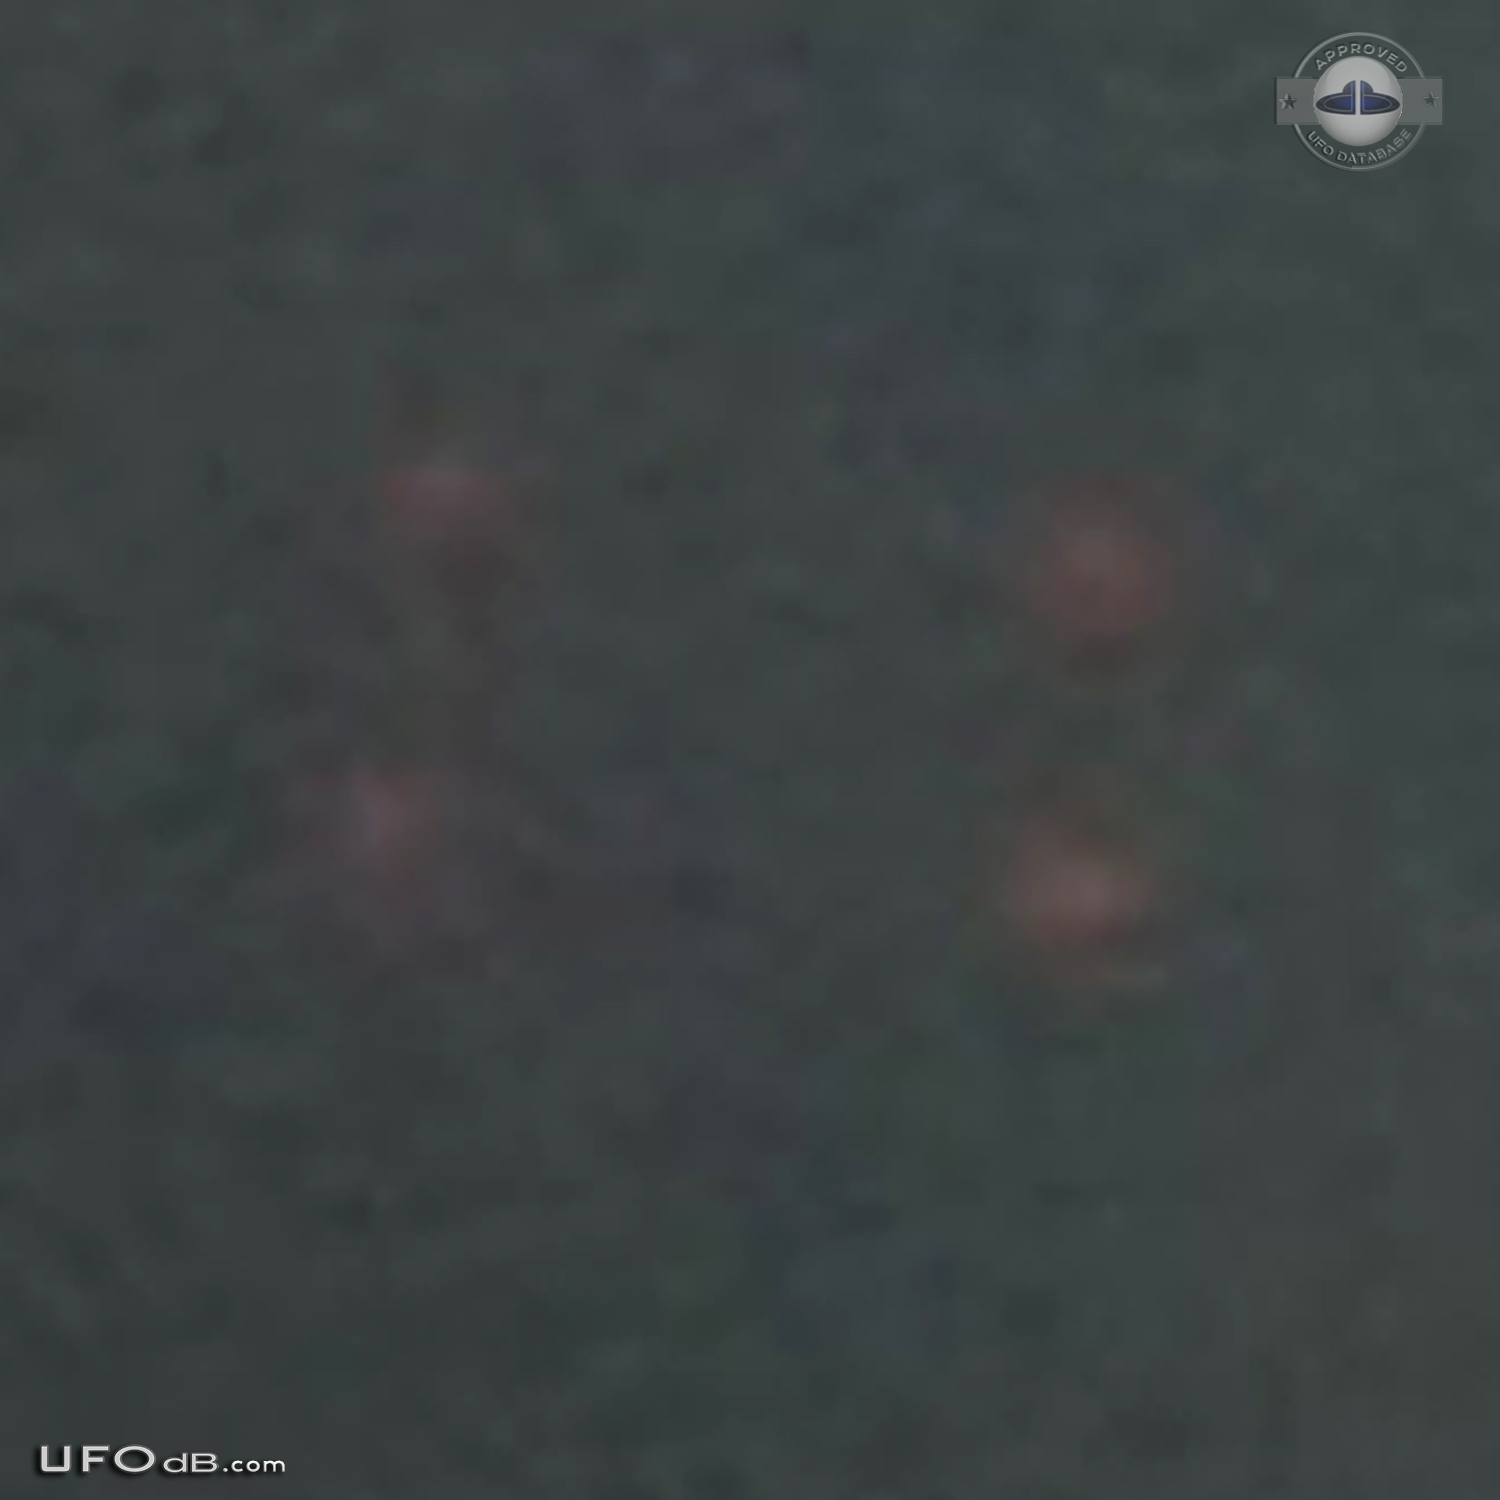 UFO made of 4 red dots in the grey sky of Bellmawr New Jersey USA 2012 UFO Picture #508-4